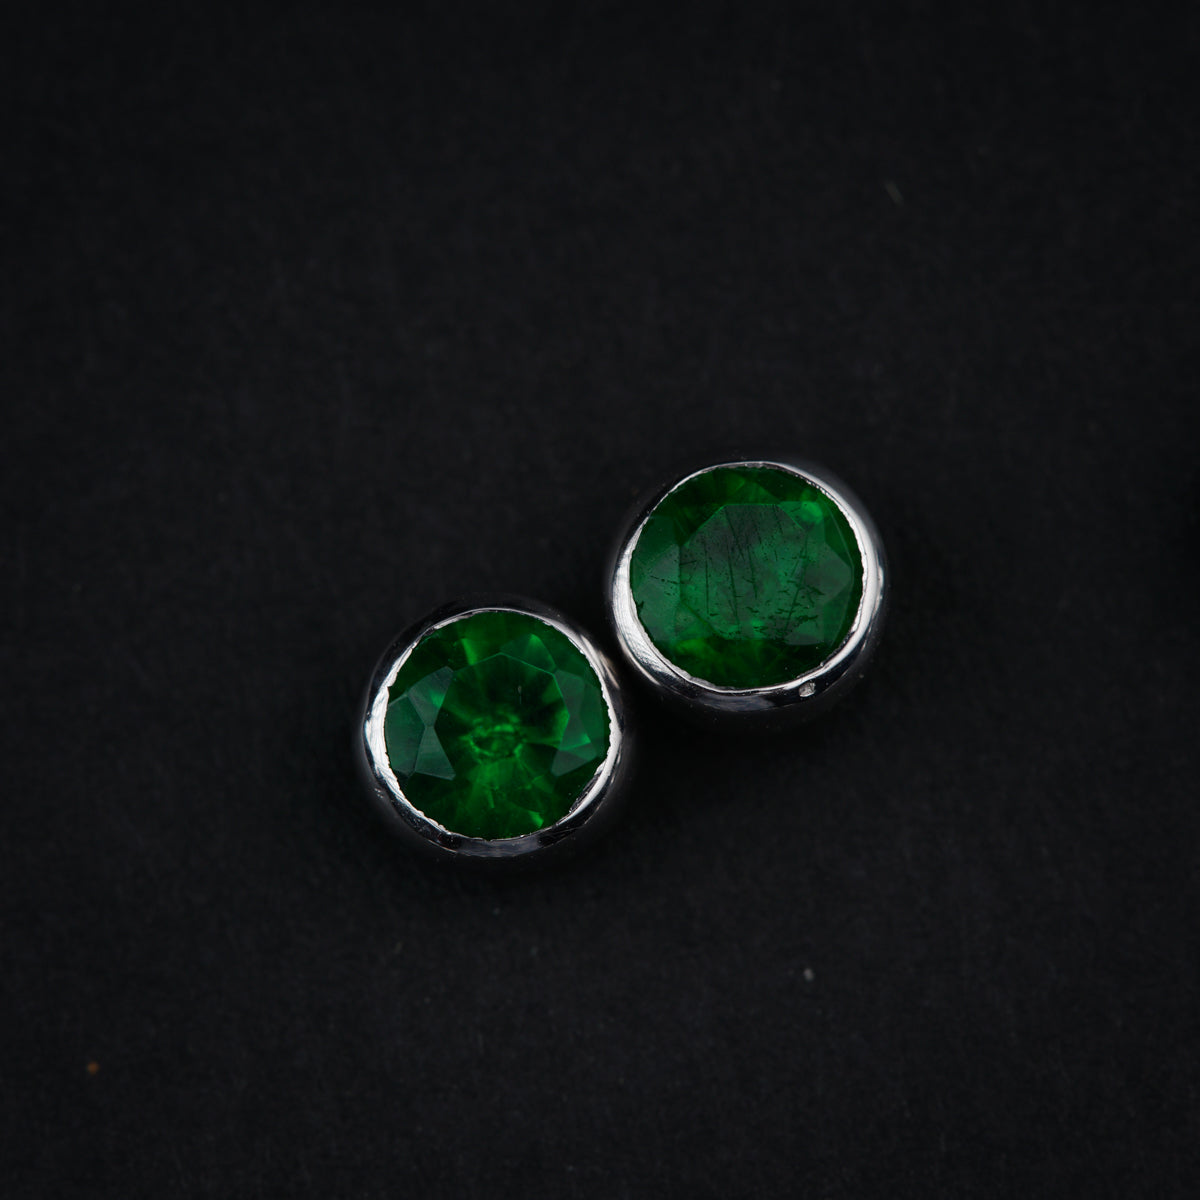 a pair of green earrings sitting on top of a black surface